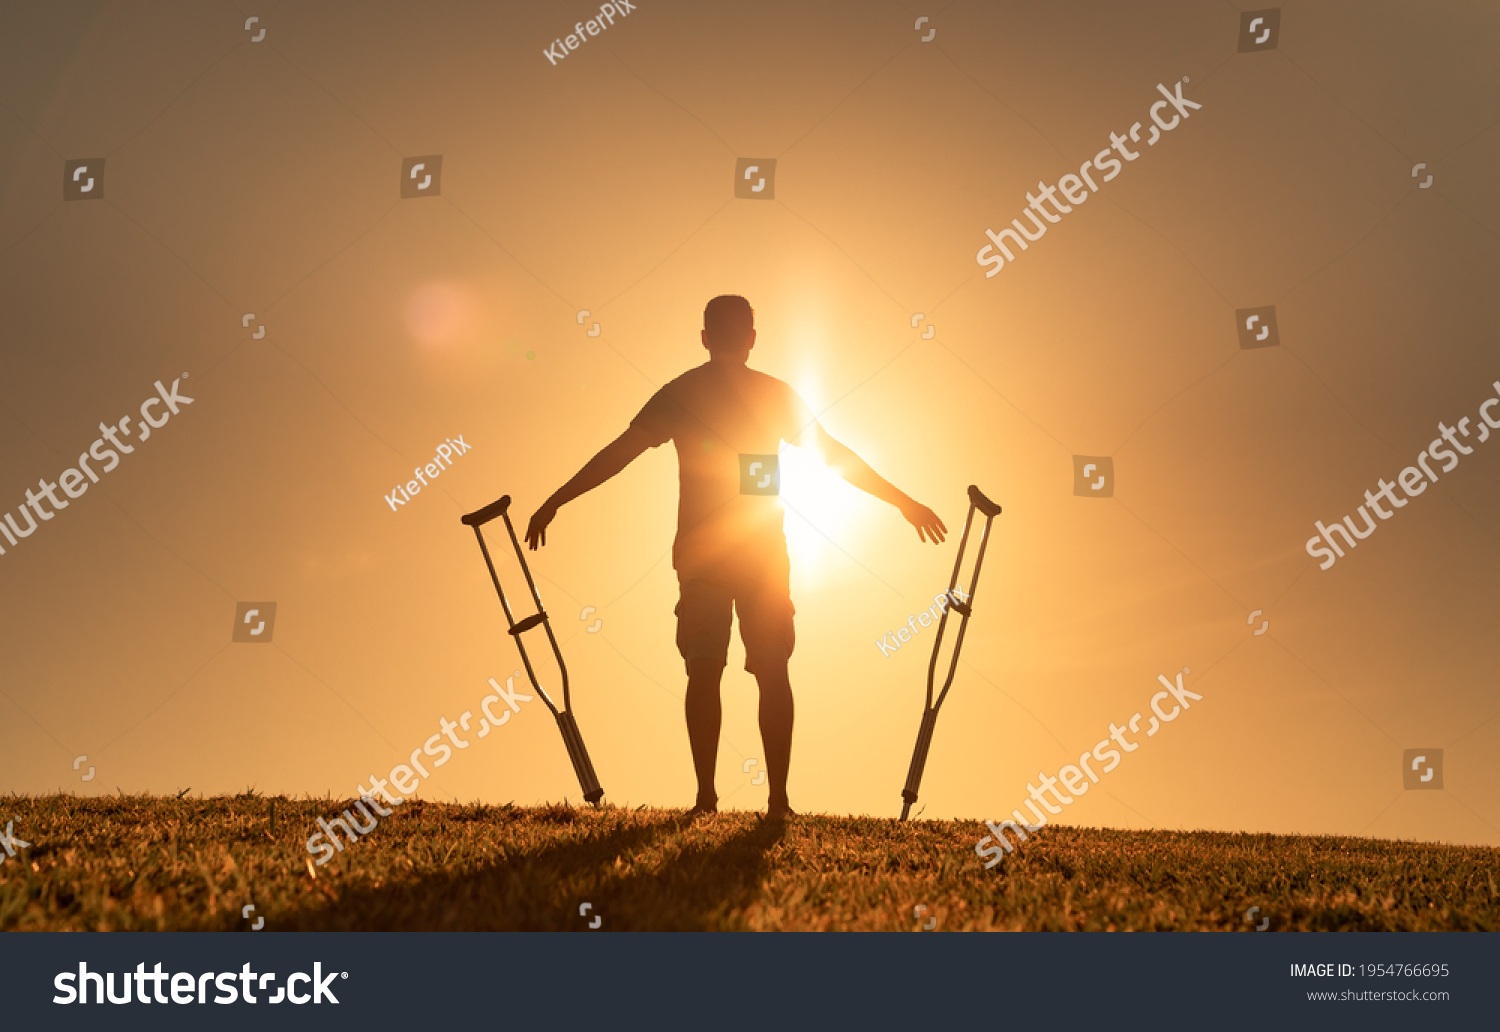 Man letting go of crutches able to walk again. Body recovery, healing, and miracle concept.  #1954766695